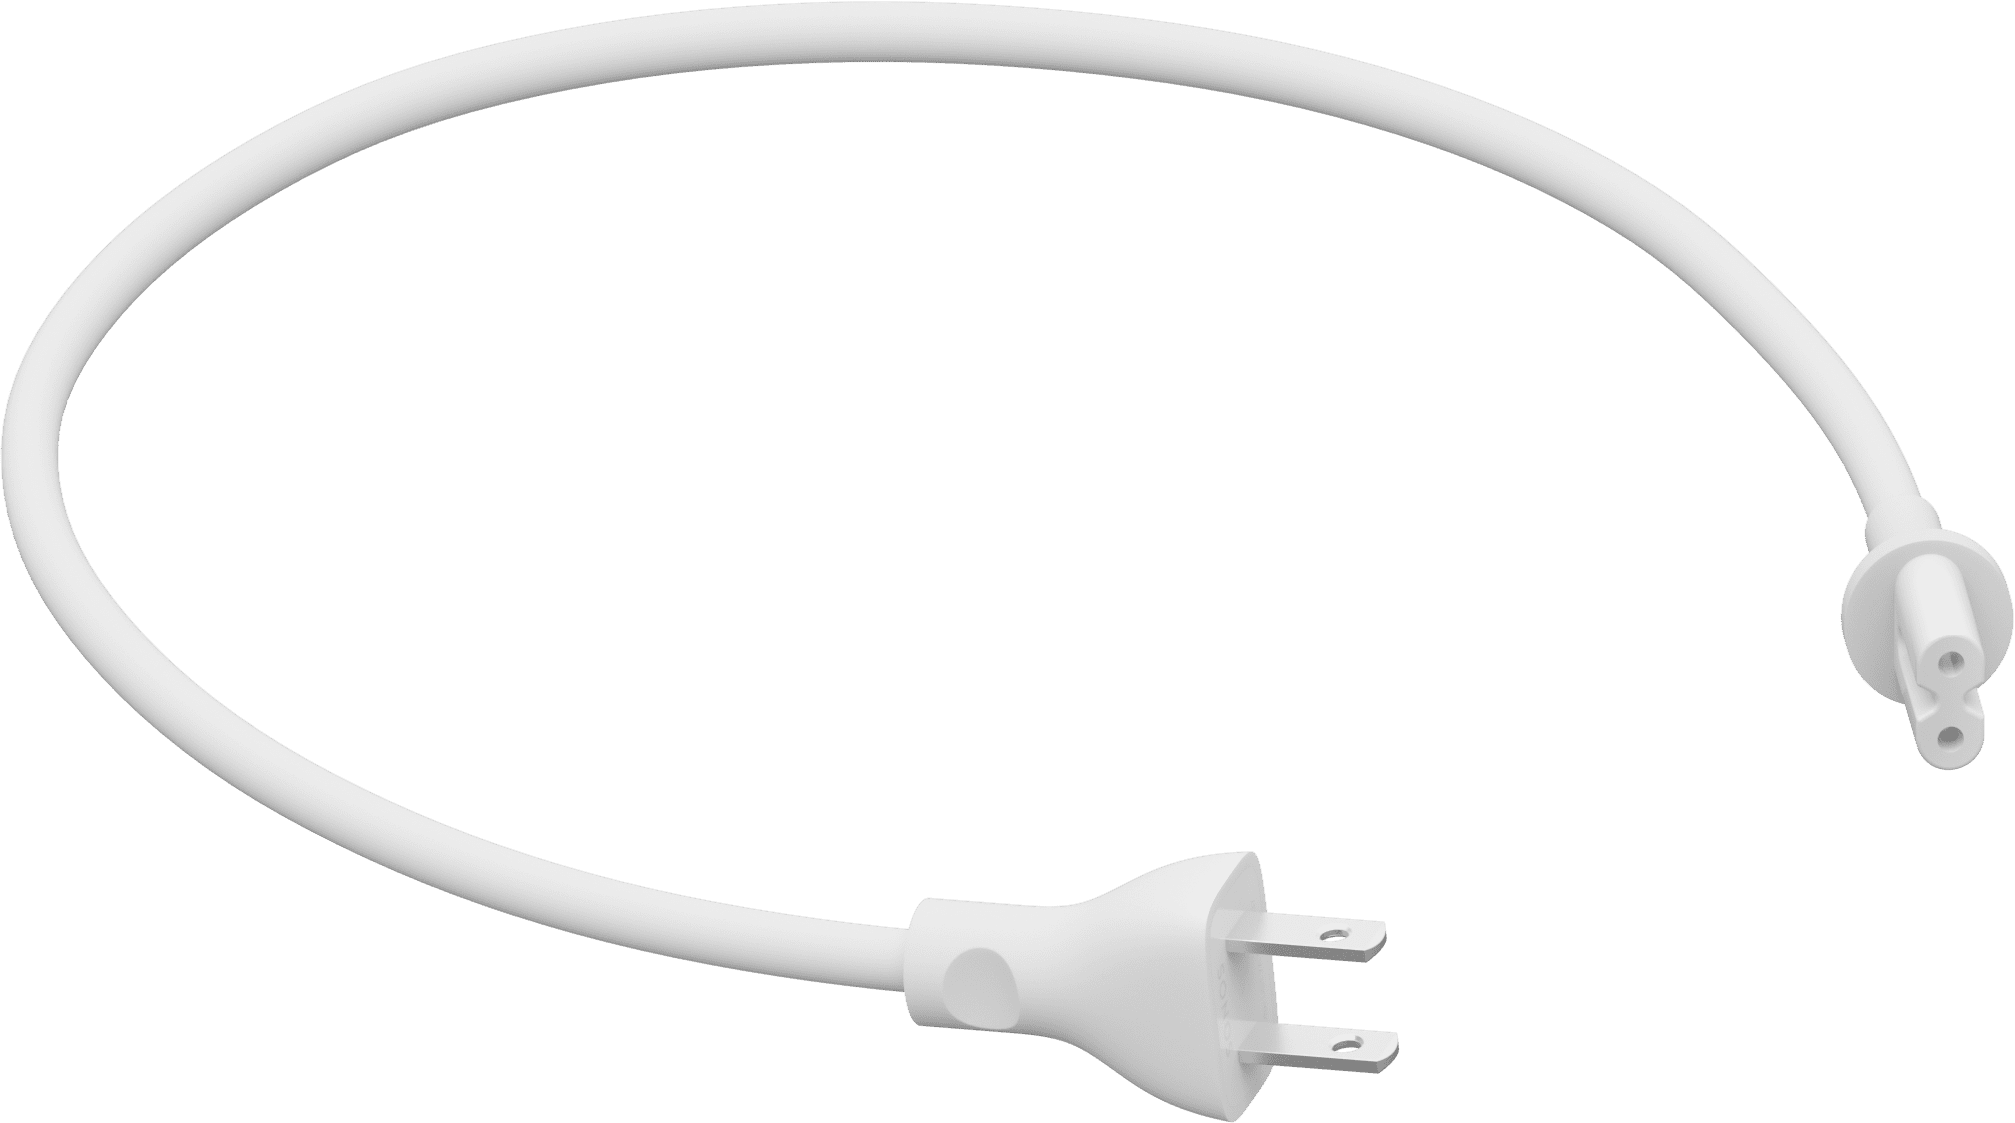 Sonos Play:5/Beam/ Amp Power Cable